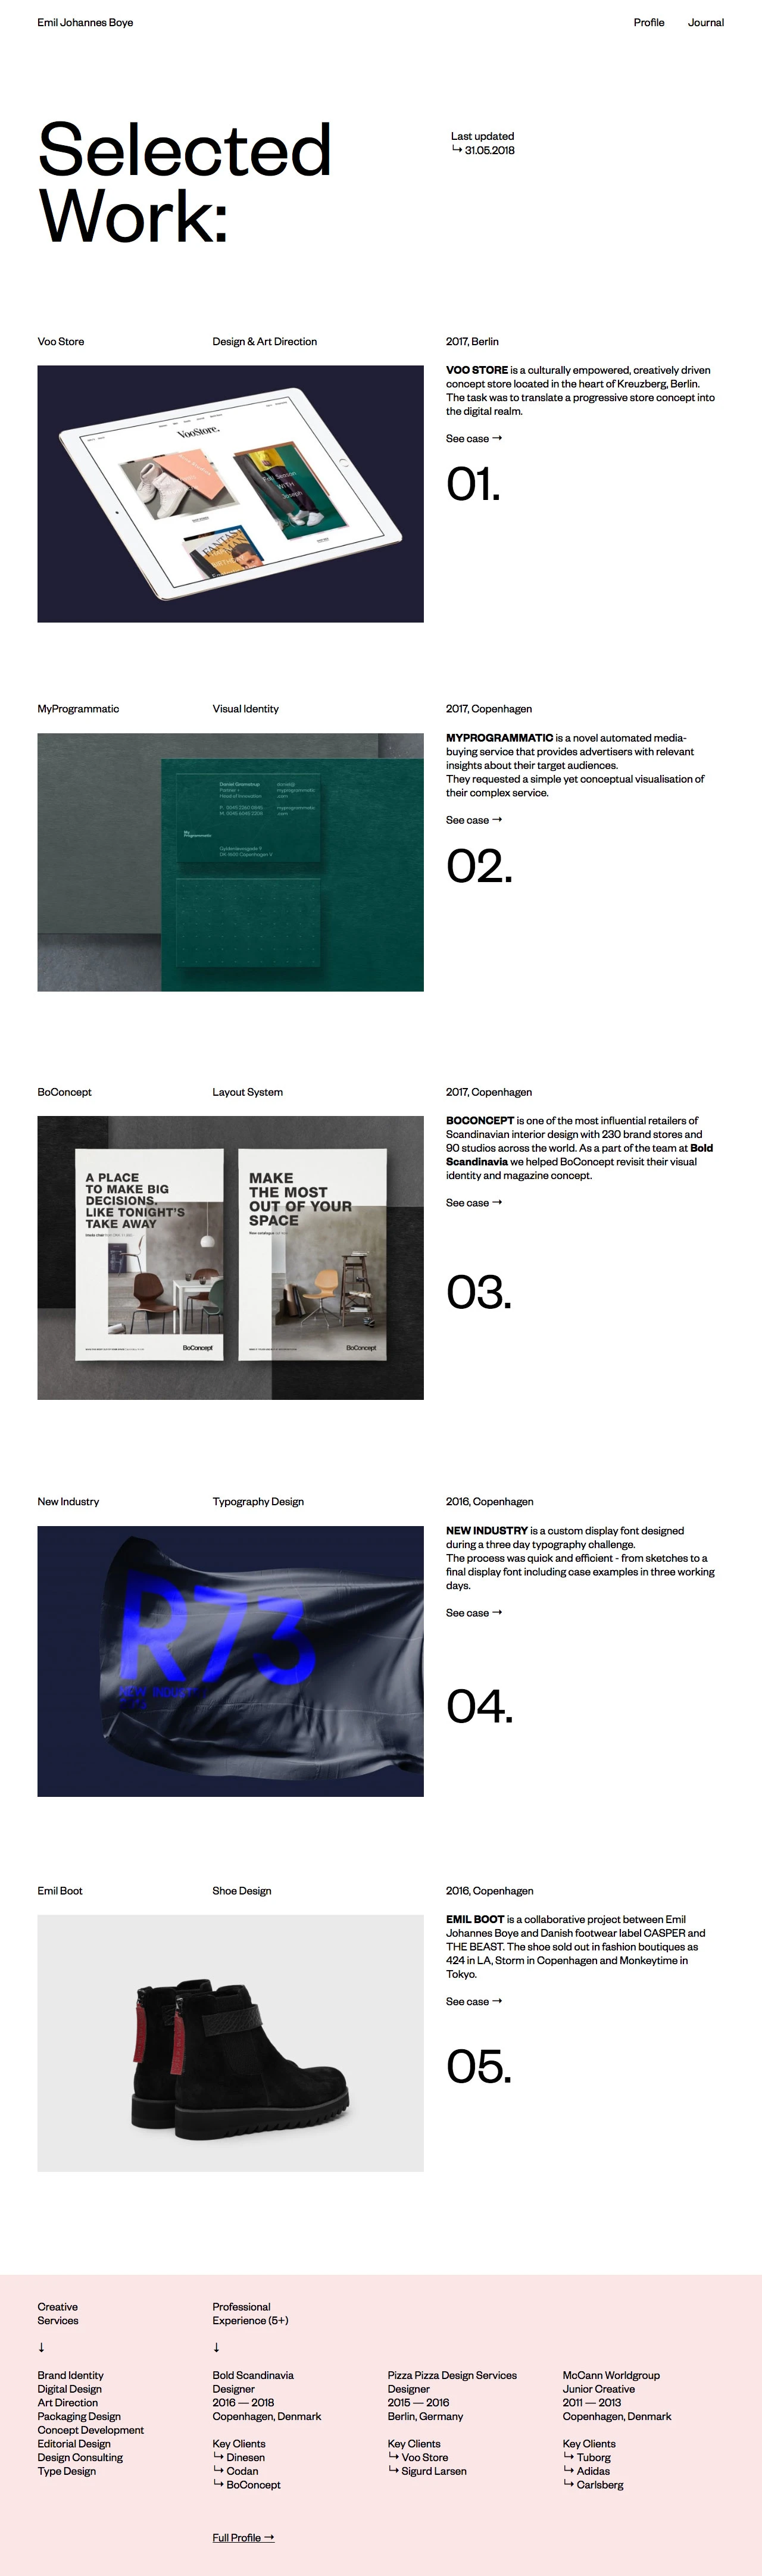 Emil Johannes Boye Landing Page Example: After working in both advertising and fashion he settled down in design where he has worked with everything from conceptual branding, editorial design and e-commerce to creative packaging projects, office-space interior and shoe design.